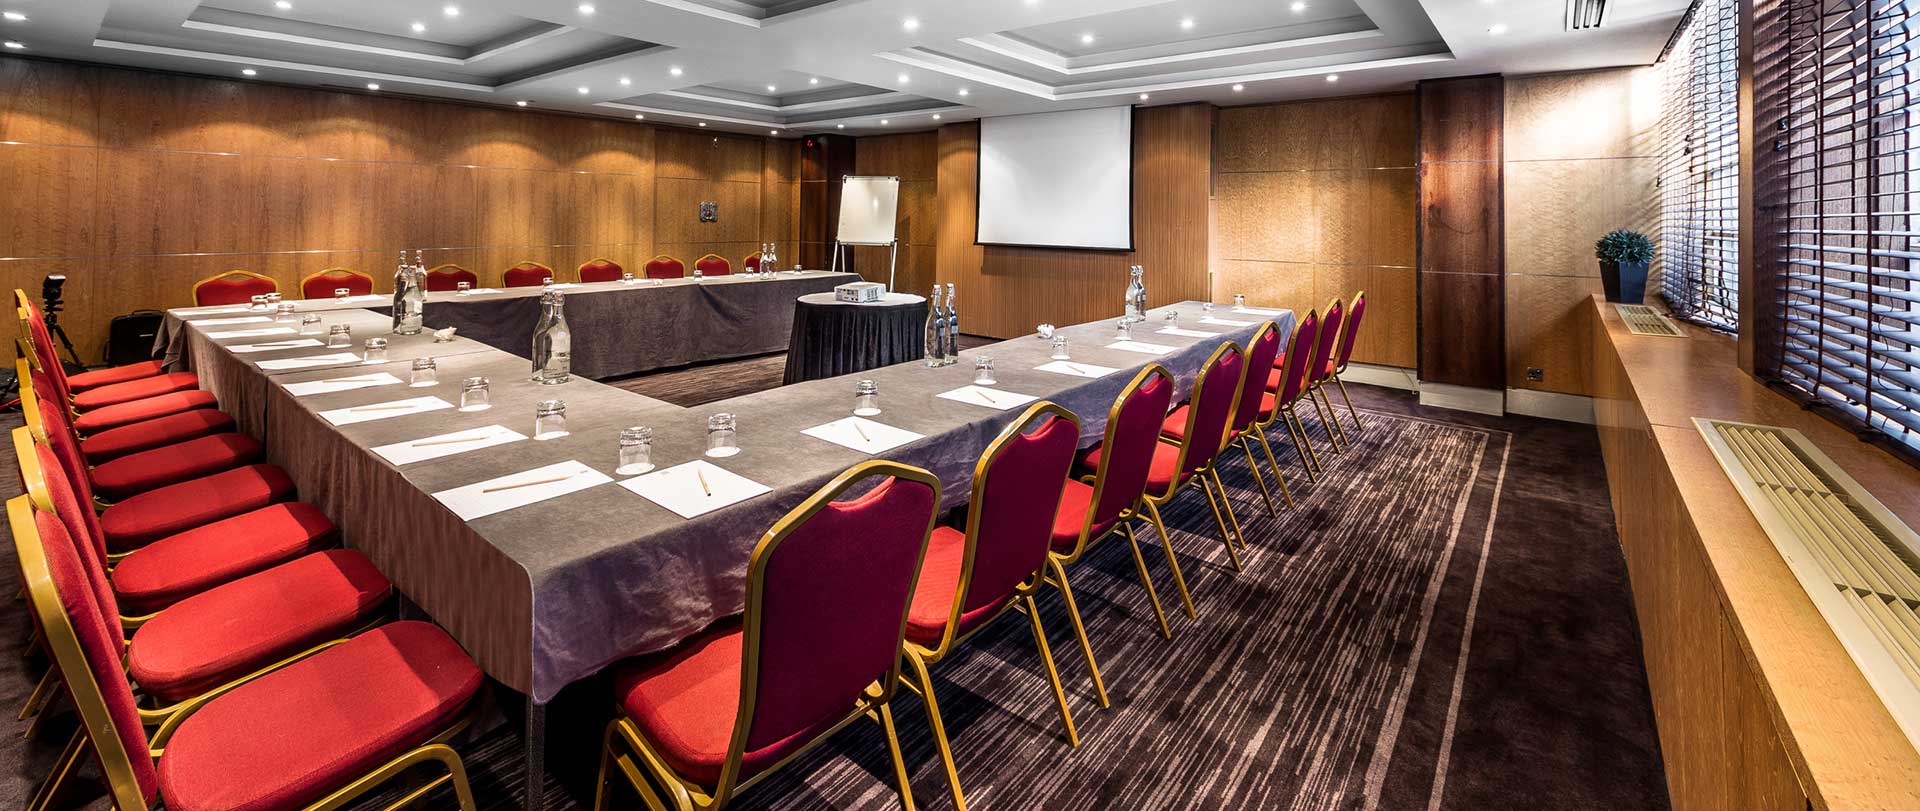 Courthouse Hotel London Meeting Room, London